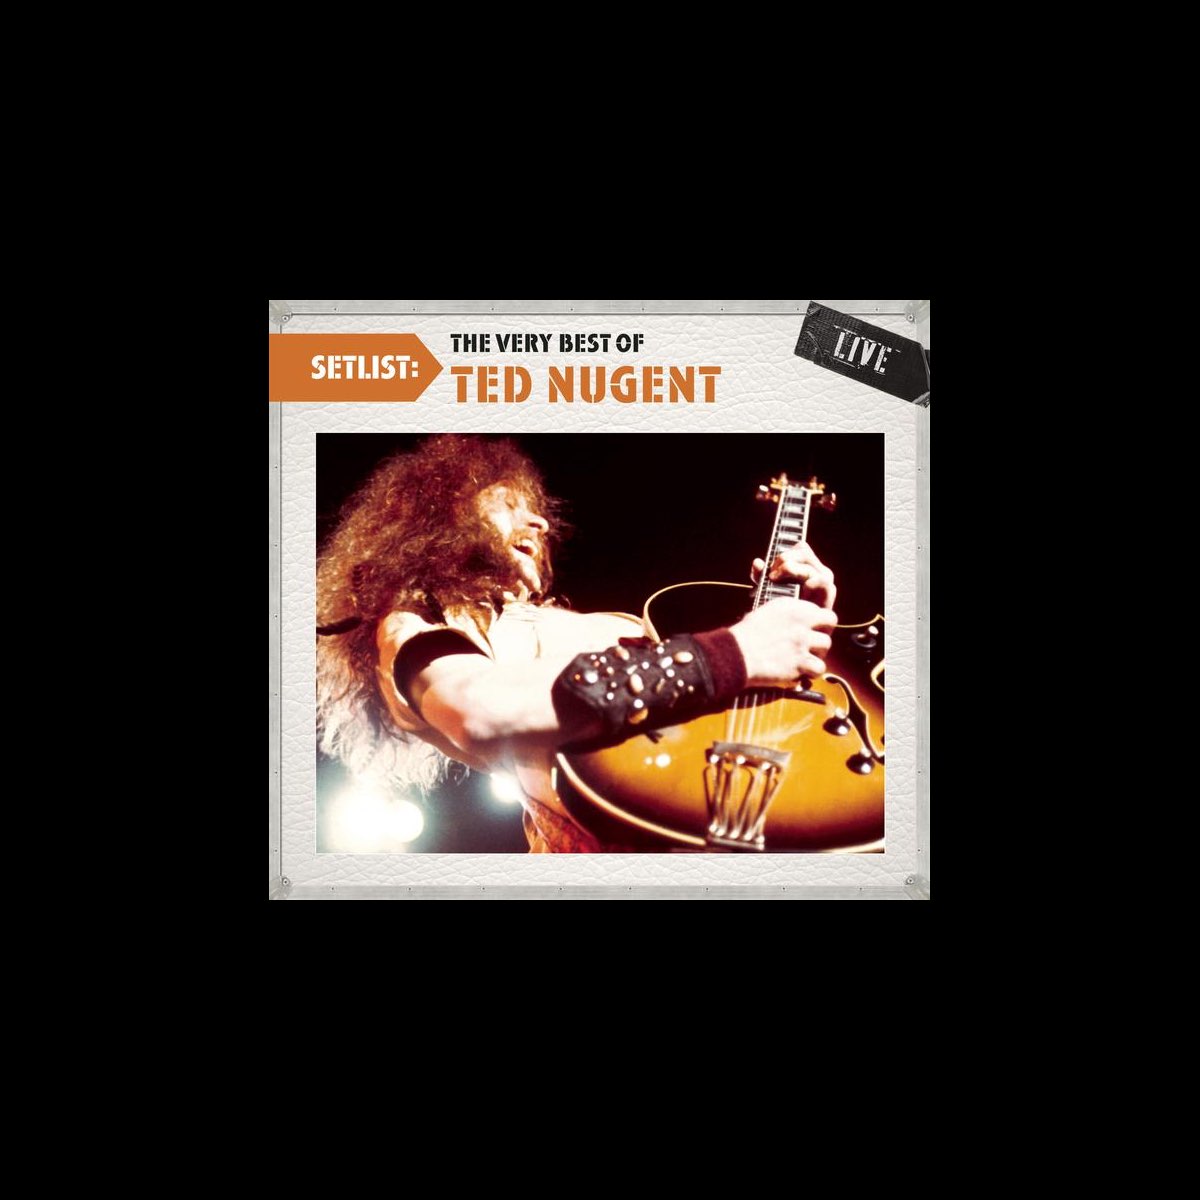 ‎Setlist The Very Best of Ted Nugent (Live) Album by Ted Nugent